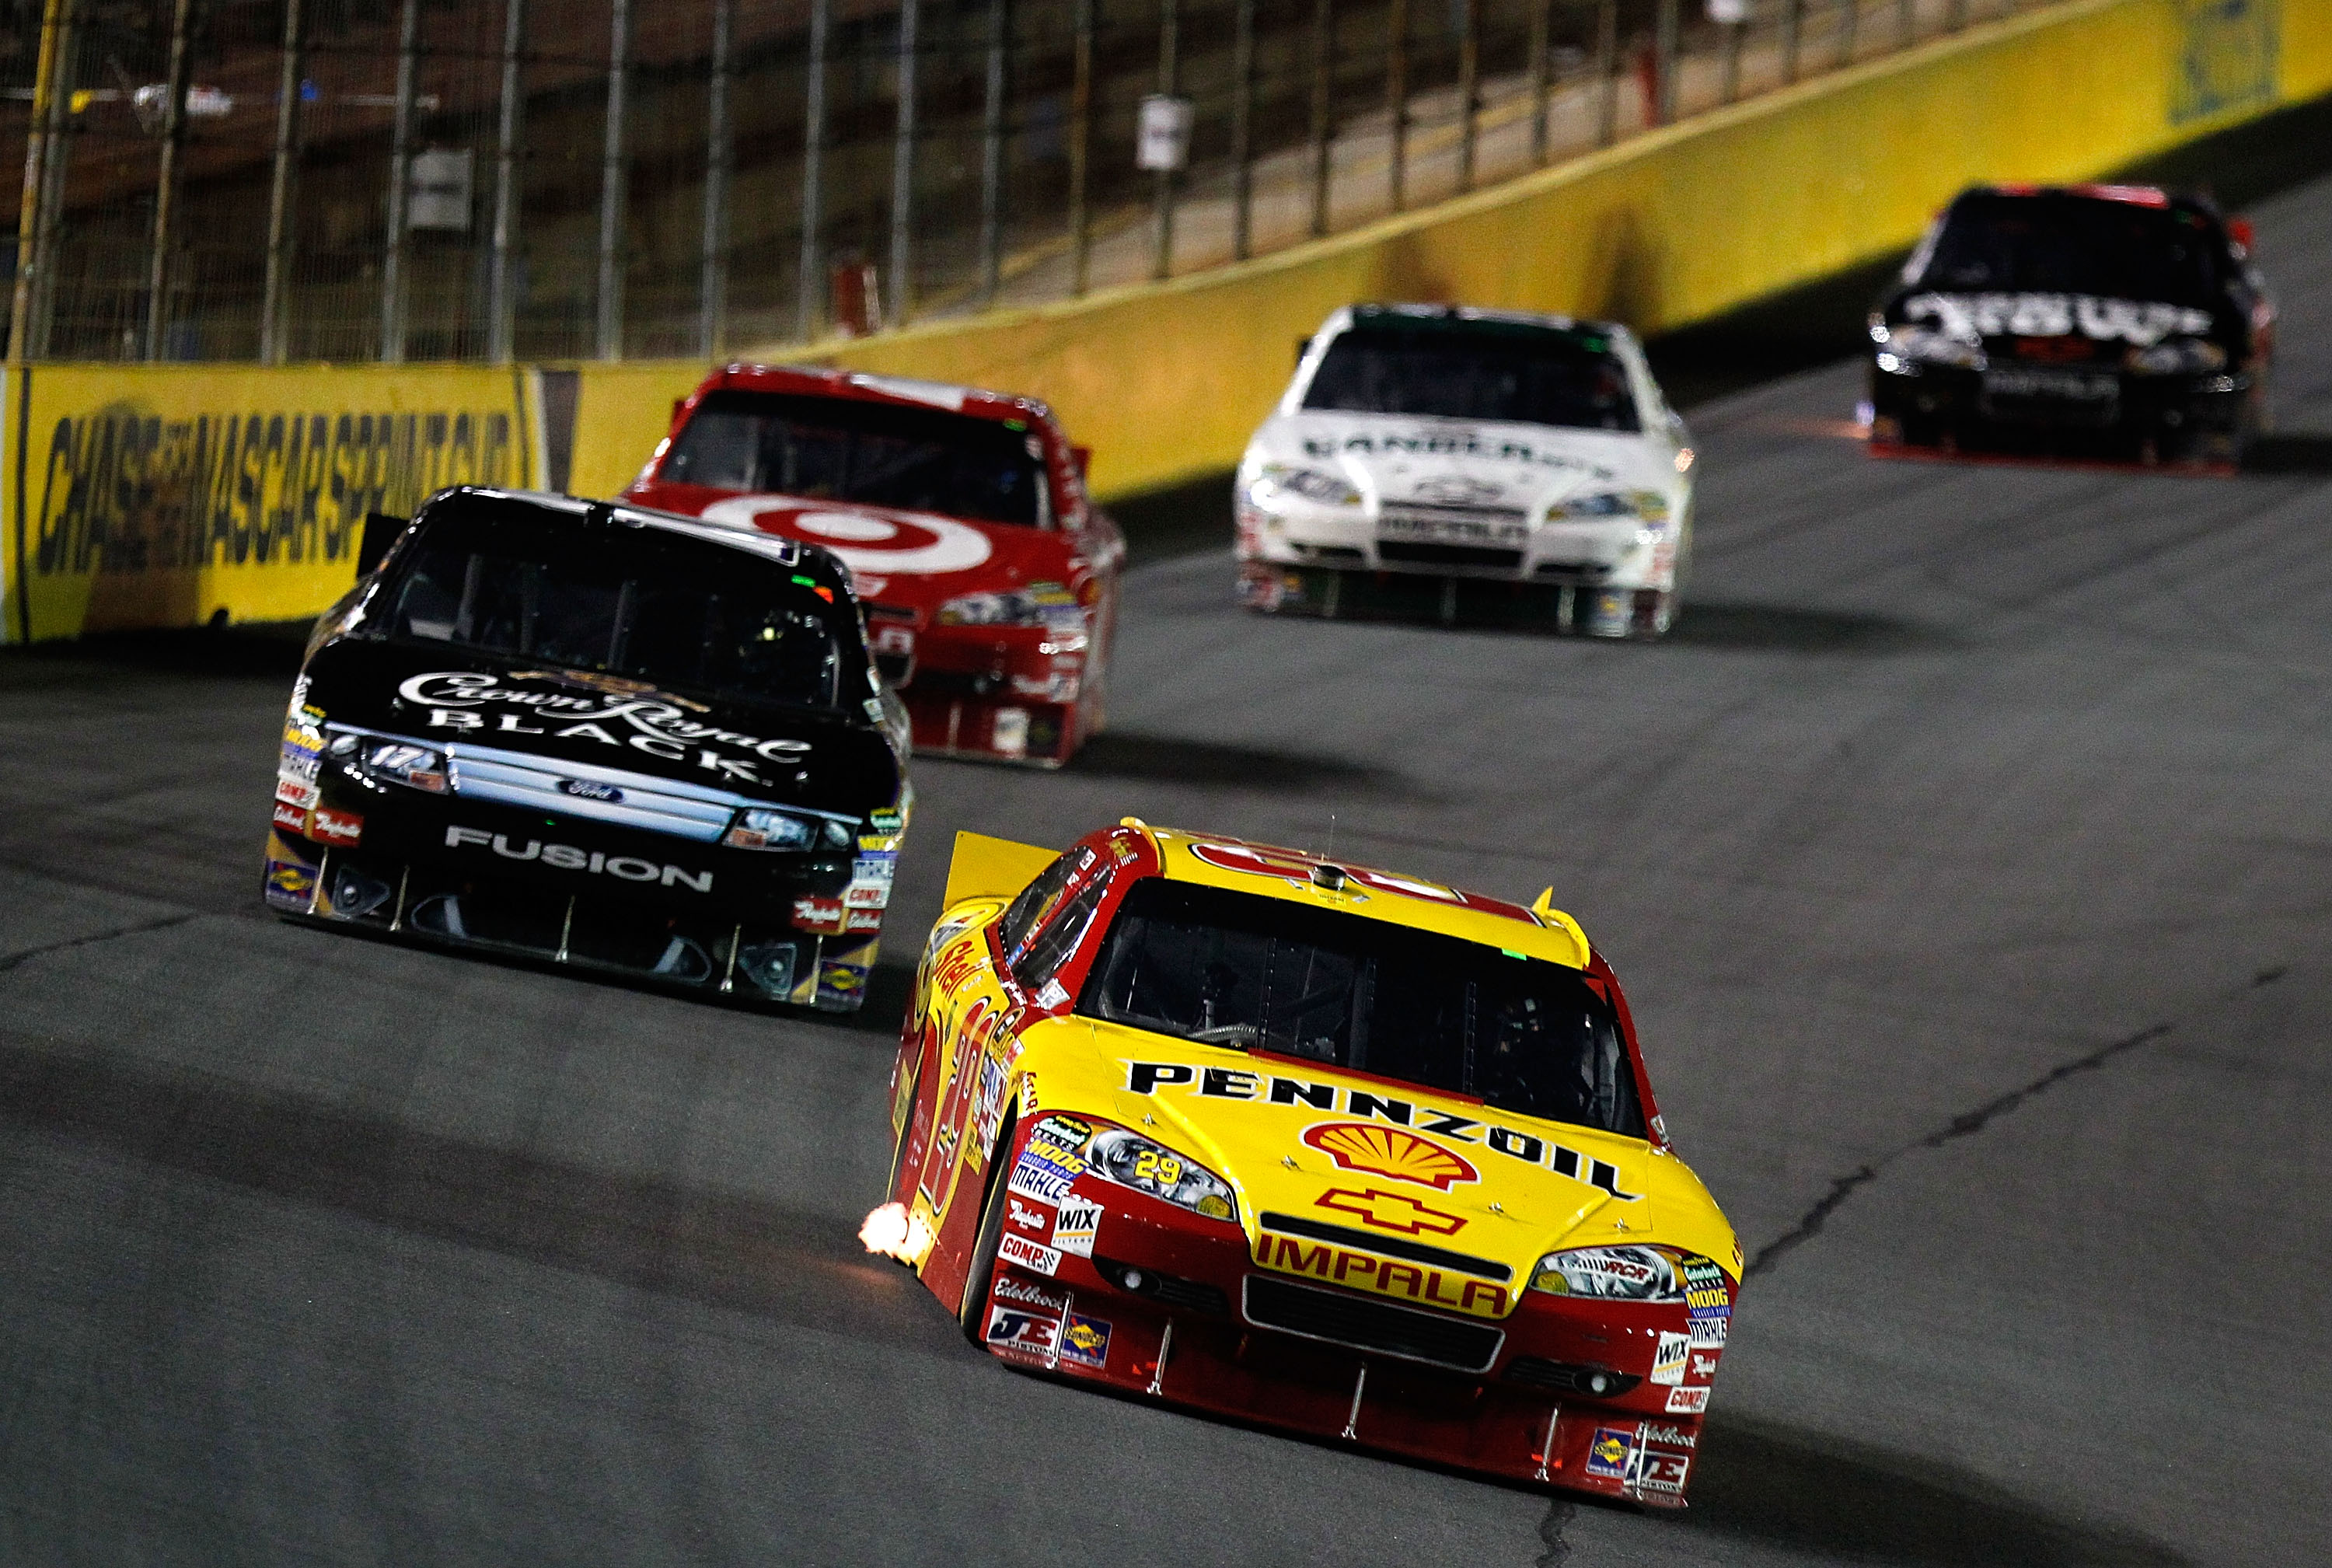 CONCORD, NC - OCTOBER 16:  Kevin Harvick, driver of the #29 Shell/Pennzoil Chevrolet, leads a group of cars during the NASCAR Sprint Cup Series Bank of America 500 at Charlotte Motor Speedway on October 16, 2010 in Concord, North Carolina.  (Photo by Geof